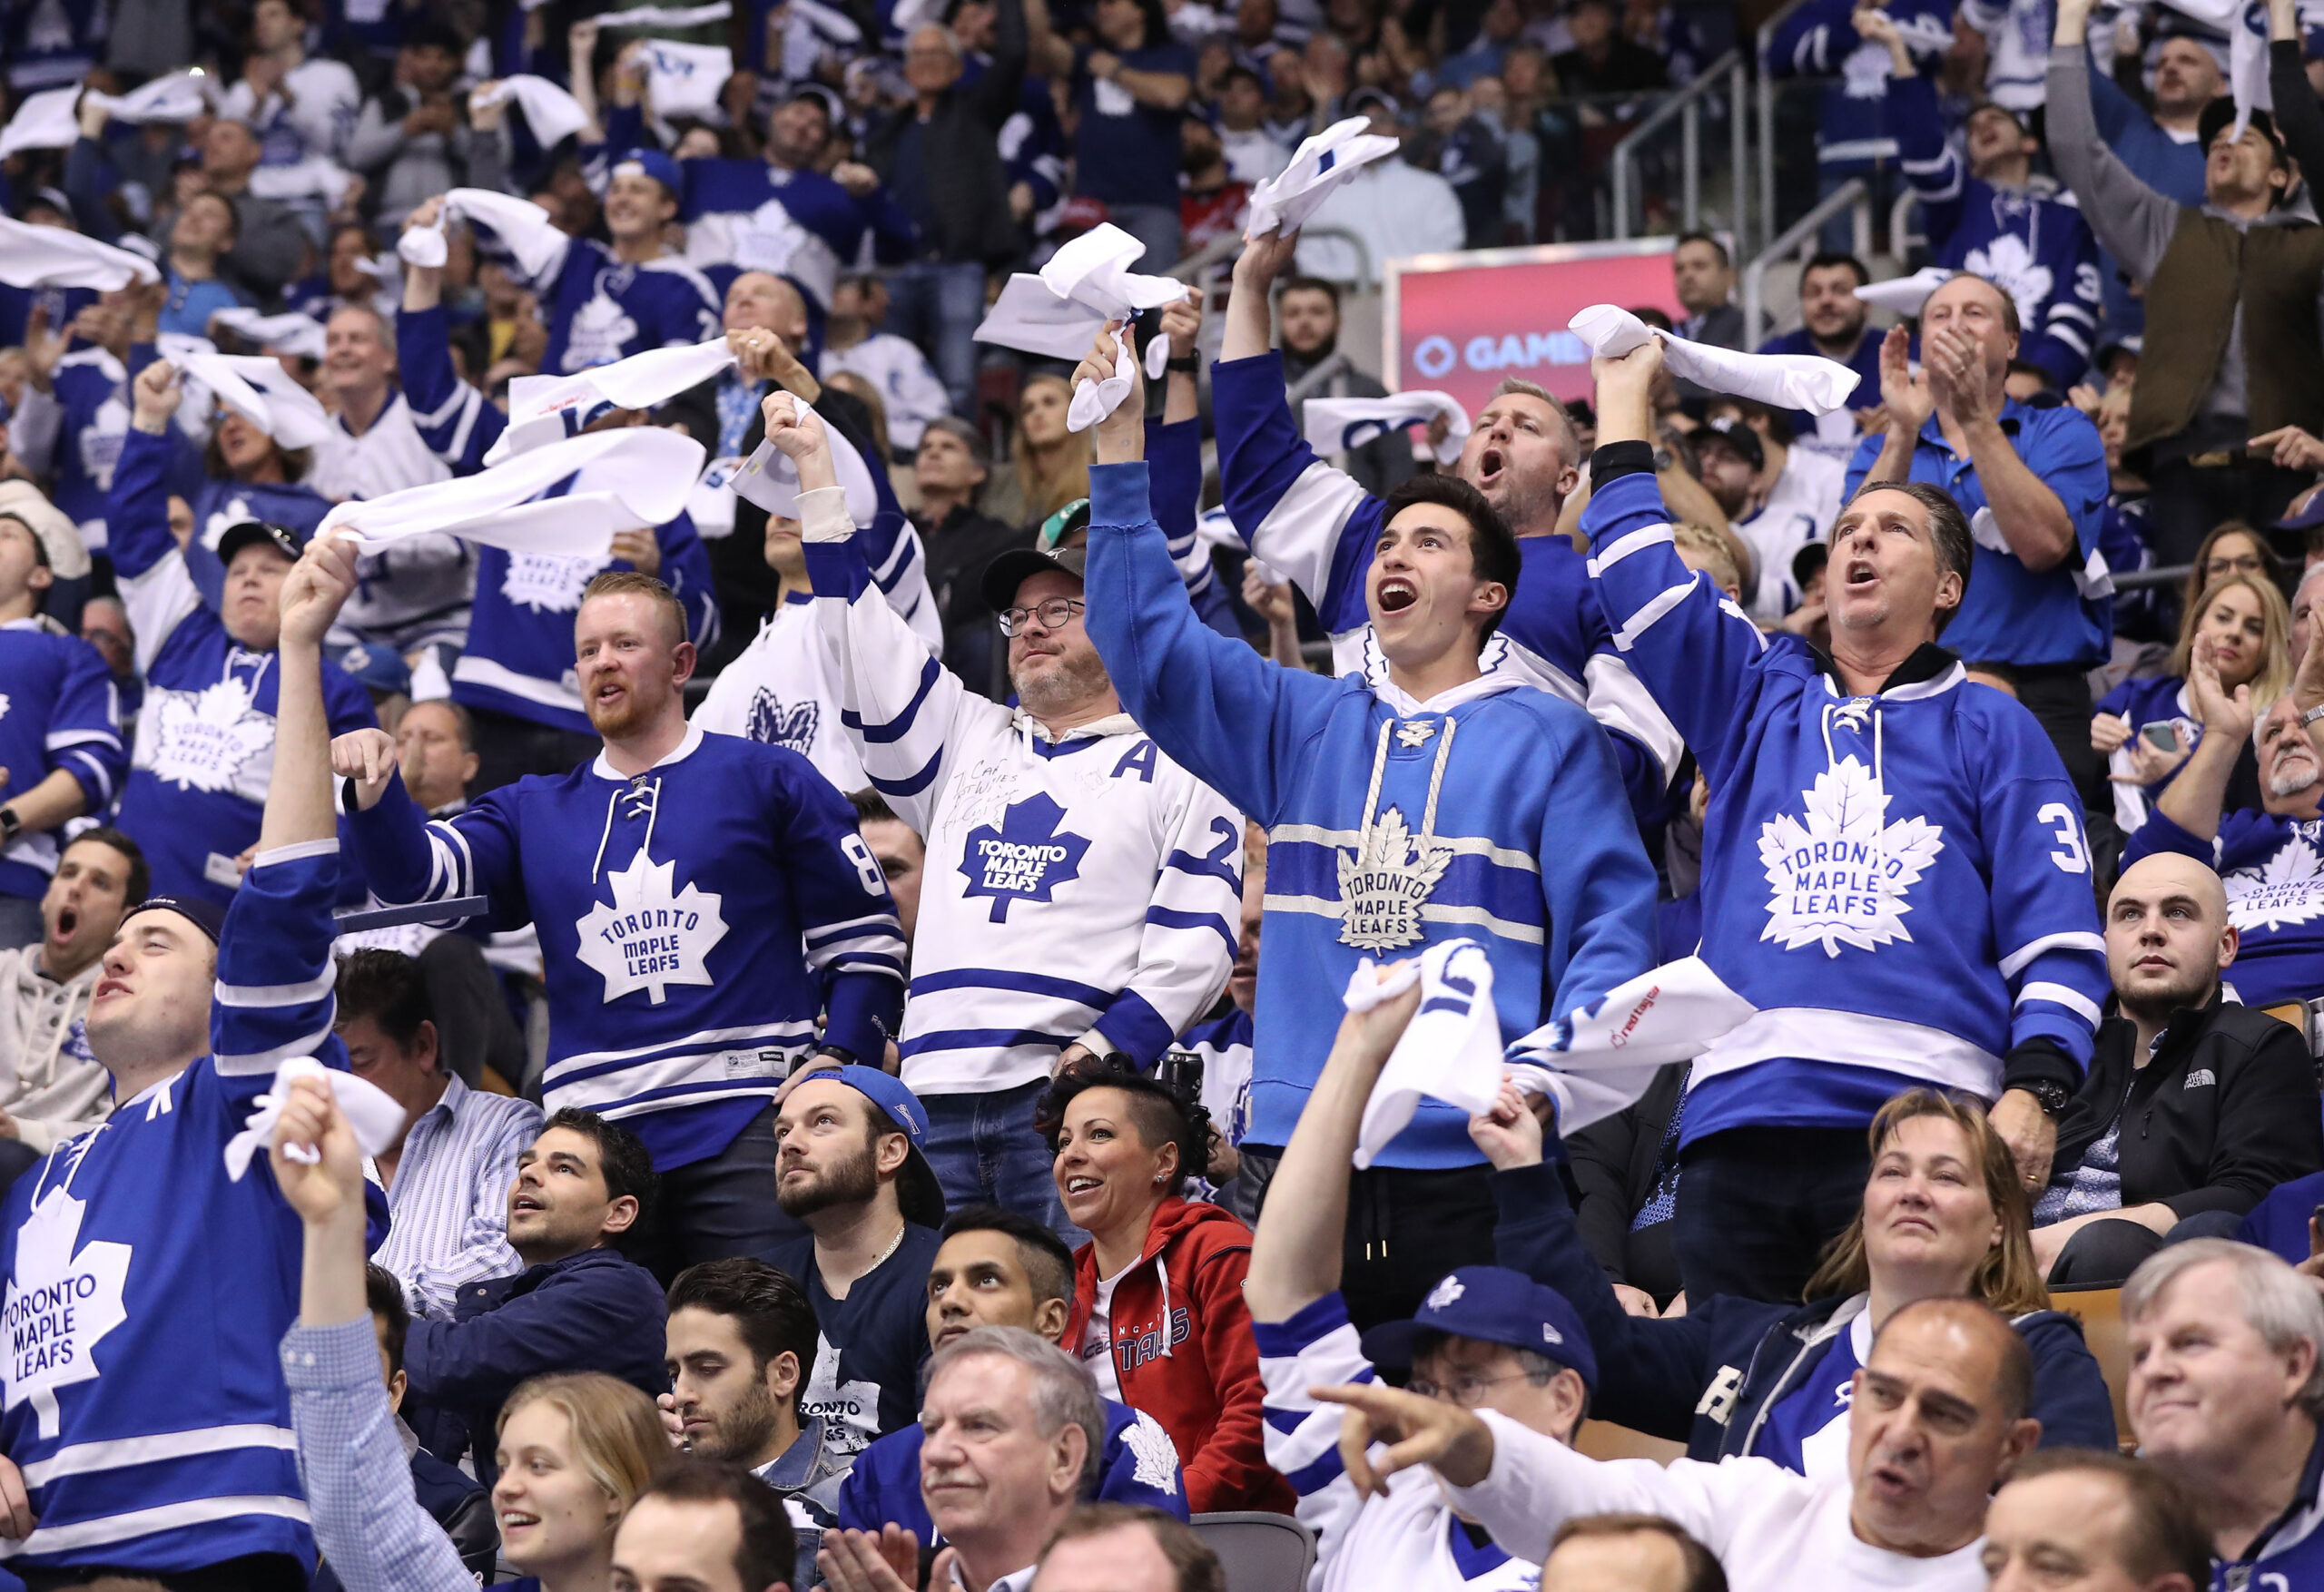 Apr 23, 2017; Toronto, Ontario, CAN; Toronto Maple Leafs fans cheer during the game against the Washington Capitals in game six of the first round of the 2017 Stanley Cup Playoffs at Air Canada Centre. The Capitals beat the Maple Leafs 2-1 in overtime. Mandatory Credit: Tom Szczerbowski-USA TODAY Sports